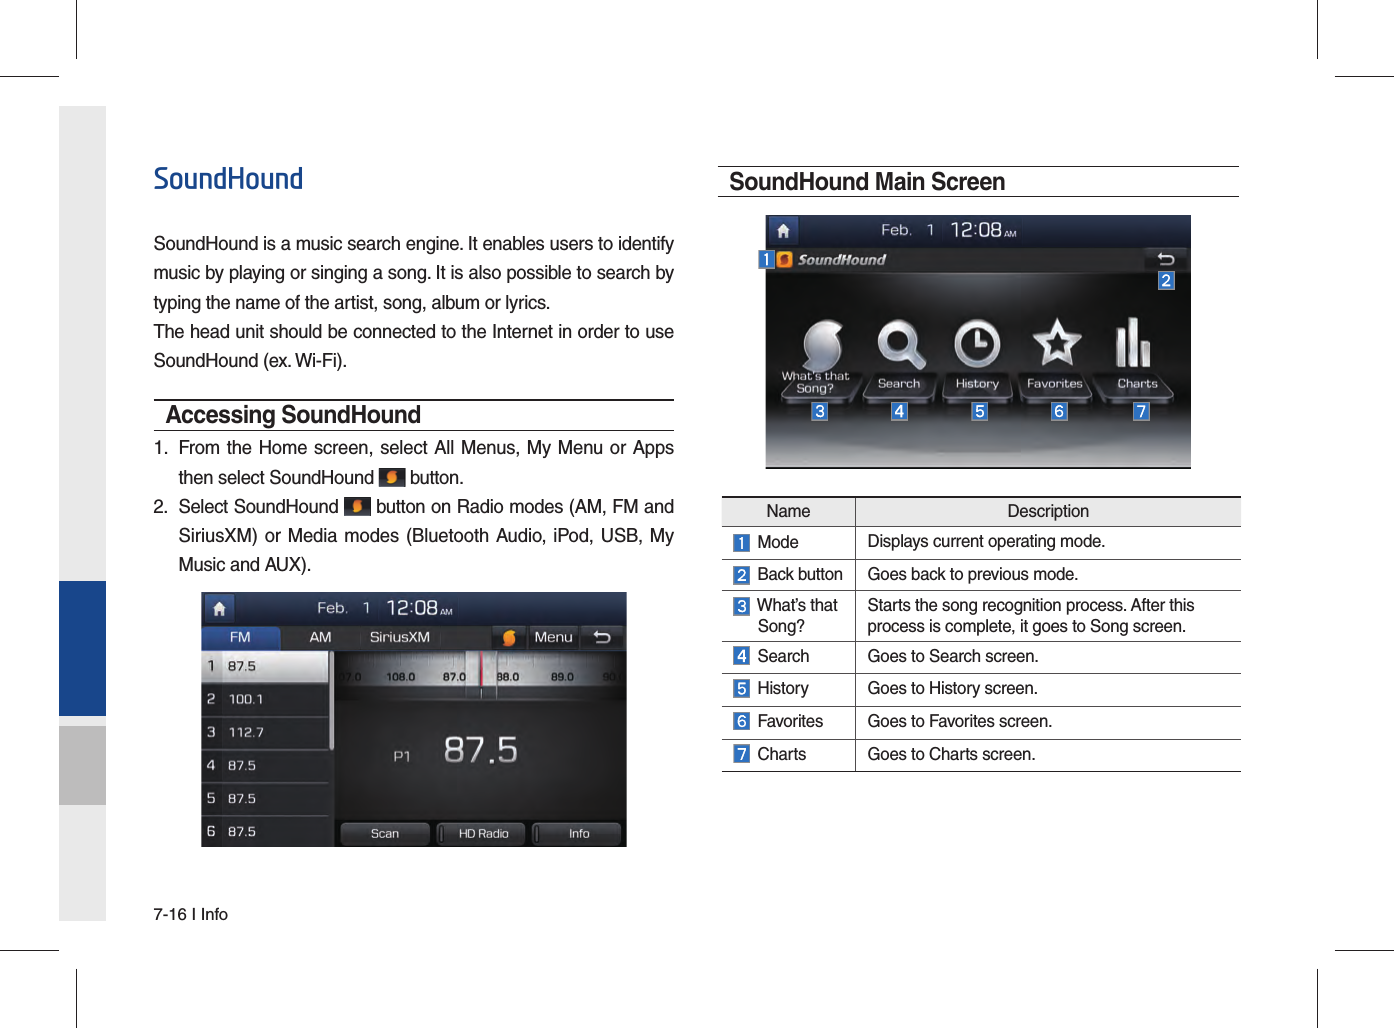 7-16 I InfoSoundHoundSoundHound is a music search engine. It enables users to identify music by playing or singing a song. It is also possible to search by typing the name of the artist, song, album or lyrics.The head unit should be connected to the Internet in order to use SoundHound (ex. Wi-Fi).Accessing SoundHound 1.  From the Home screen, select All Menus, My Menu or Appsthen select SoundHound  button.2.  Select SoundHound  button on Radio modes (AM, FM and SiriusXM) or Media modes (Bluetooth Audio, iPod, USB, My Music and AUX). SoundHound Main ScreenName Description Mode Displays current operating mode.  Back button Goes back to previous mode.  What’s that  Song? Starts the song recognition process. After this process is complete, it goes to Song screen.  Search Goes to Search screen. History Goes to History screen.  Favorites Goes to Favorites screen. Charts Goes to Charts screen.